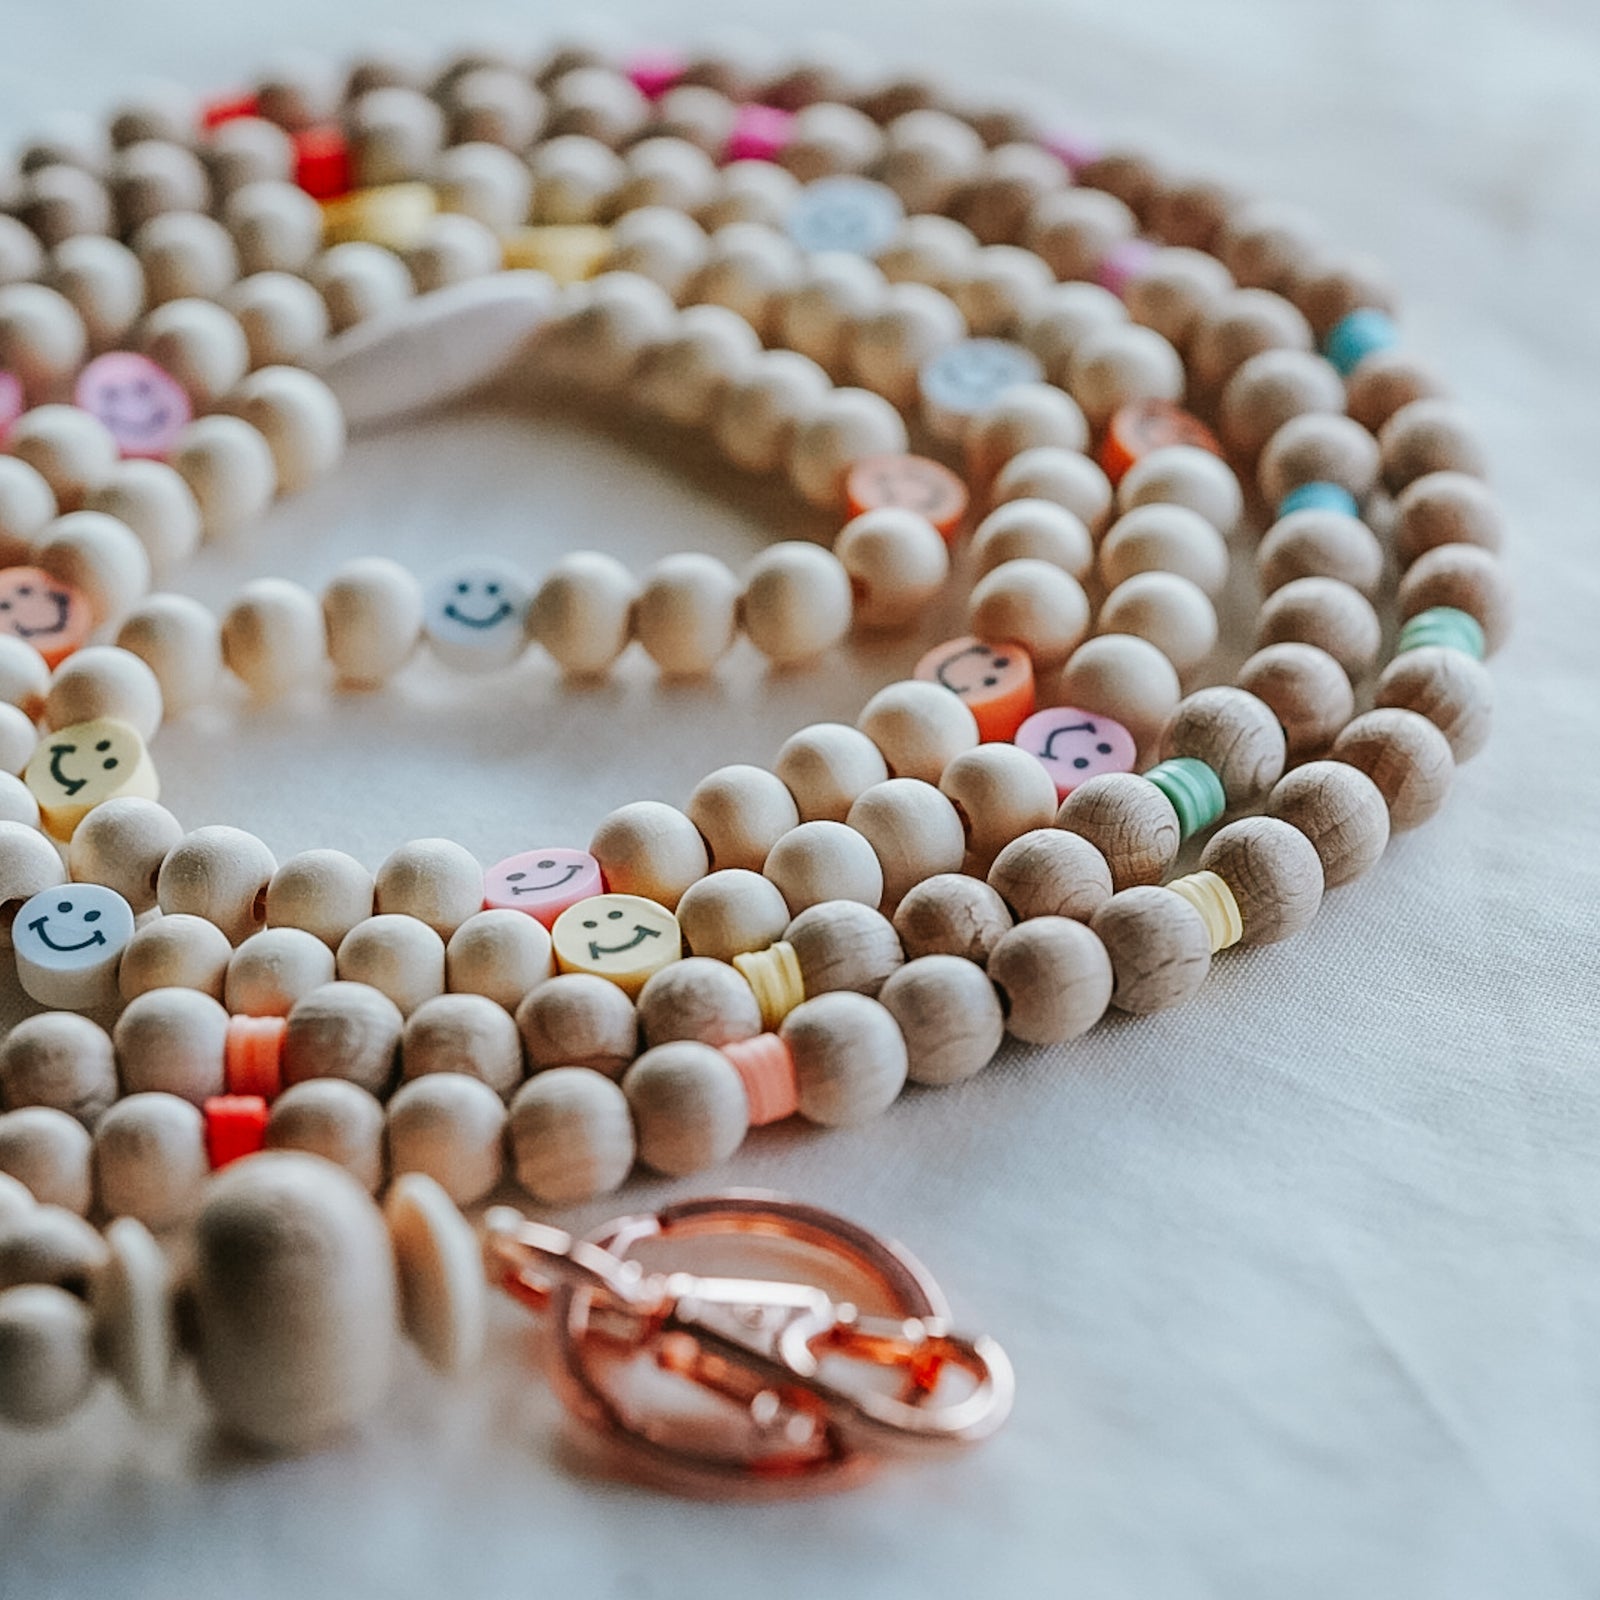 ACCESSORIES: DIY Fabric Knotted Bead Necklaces